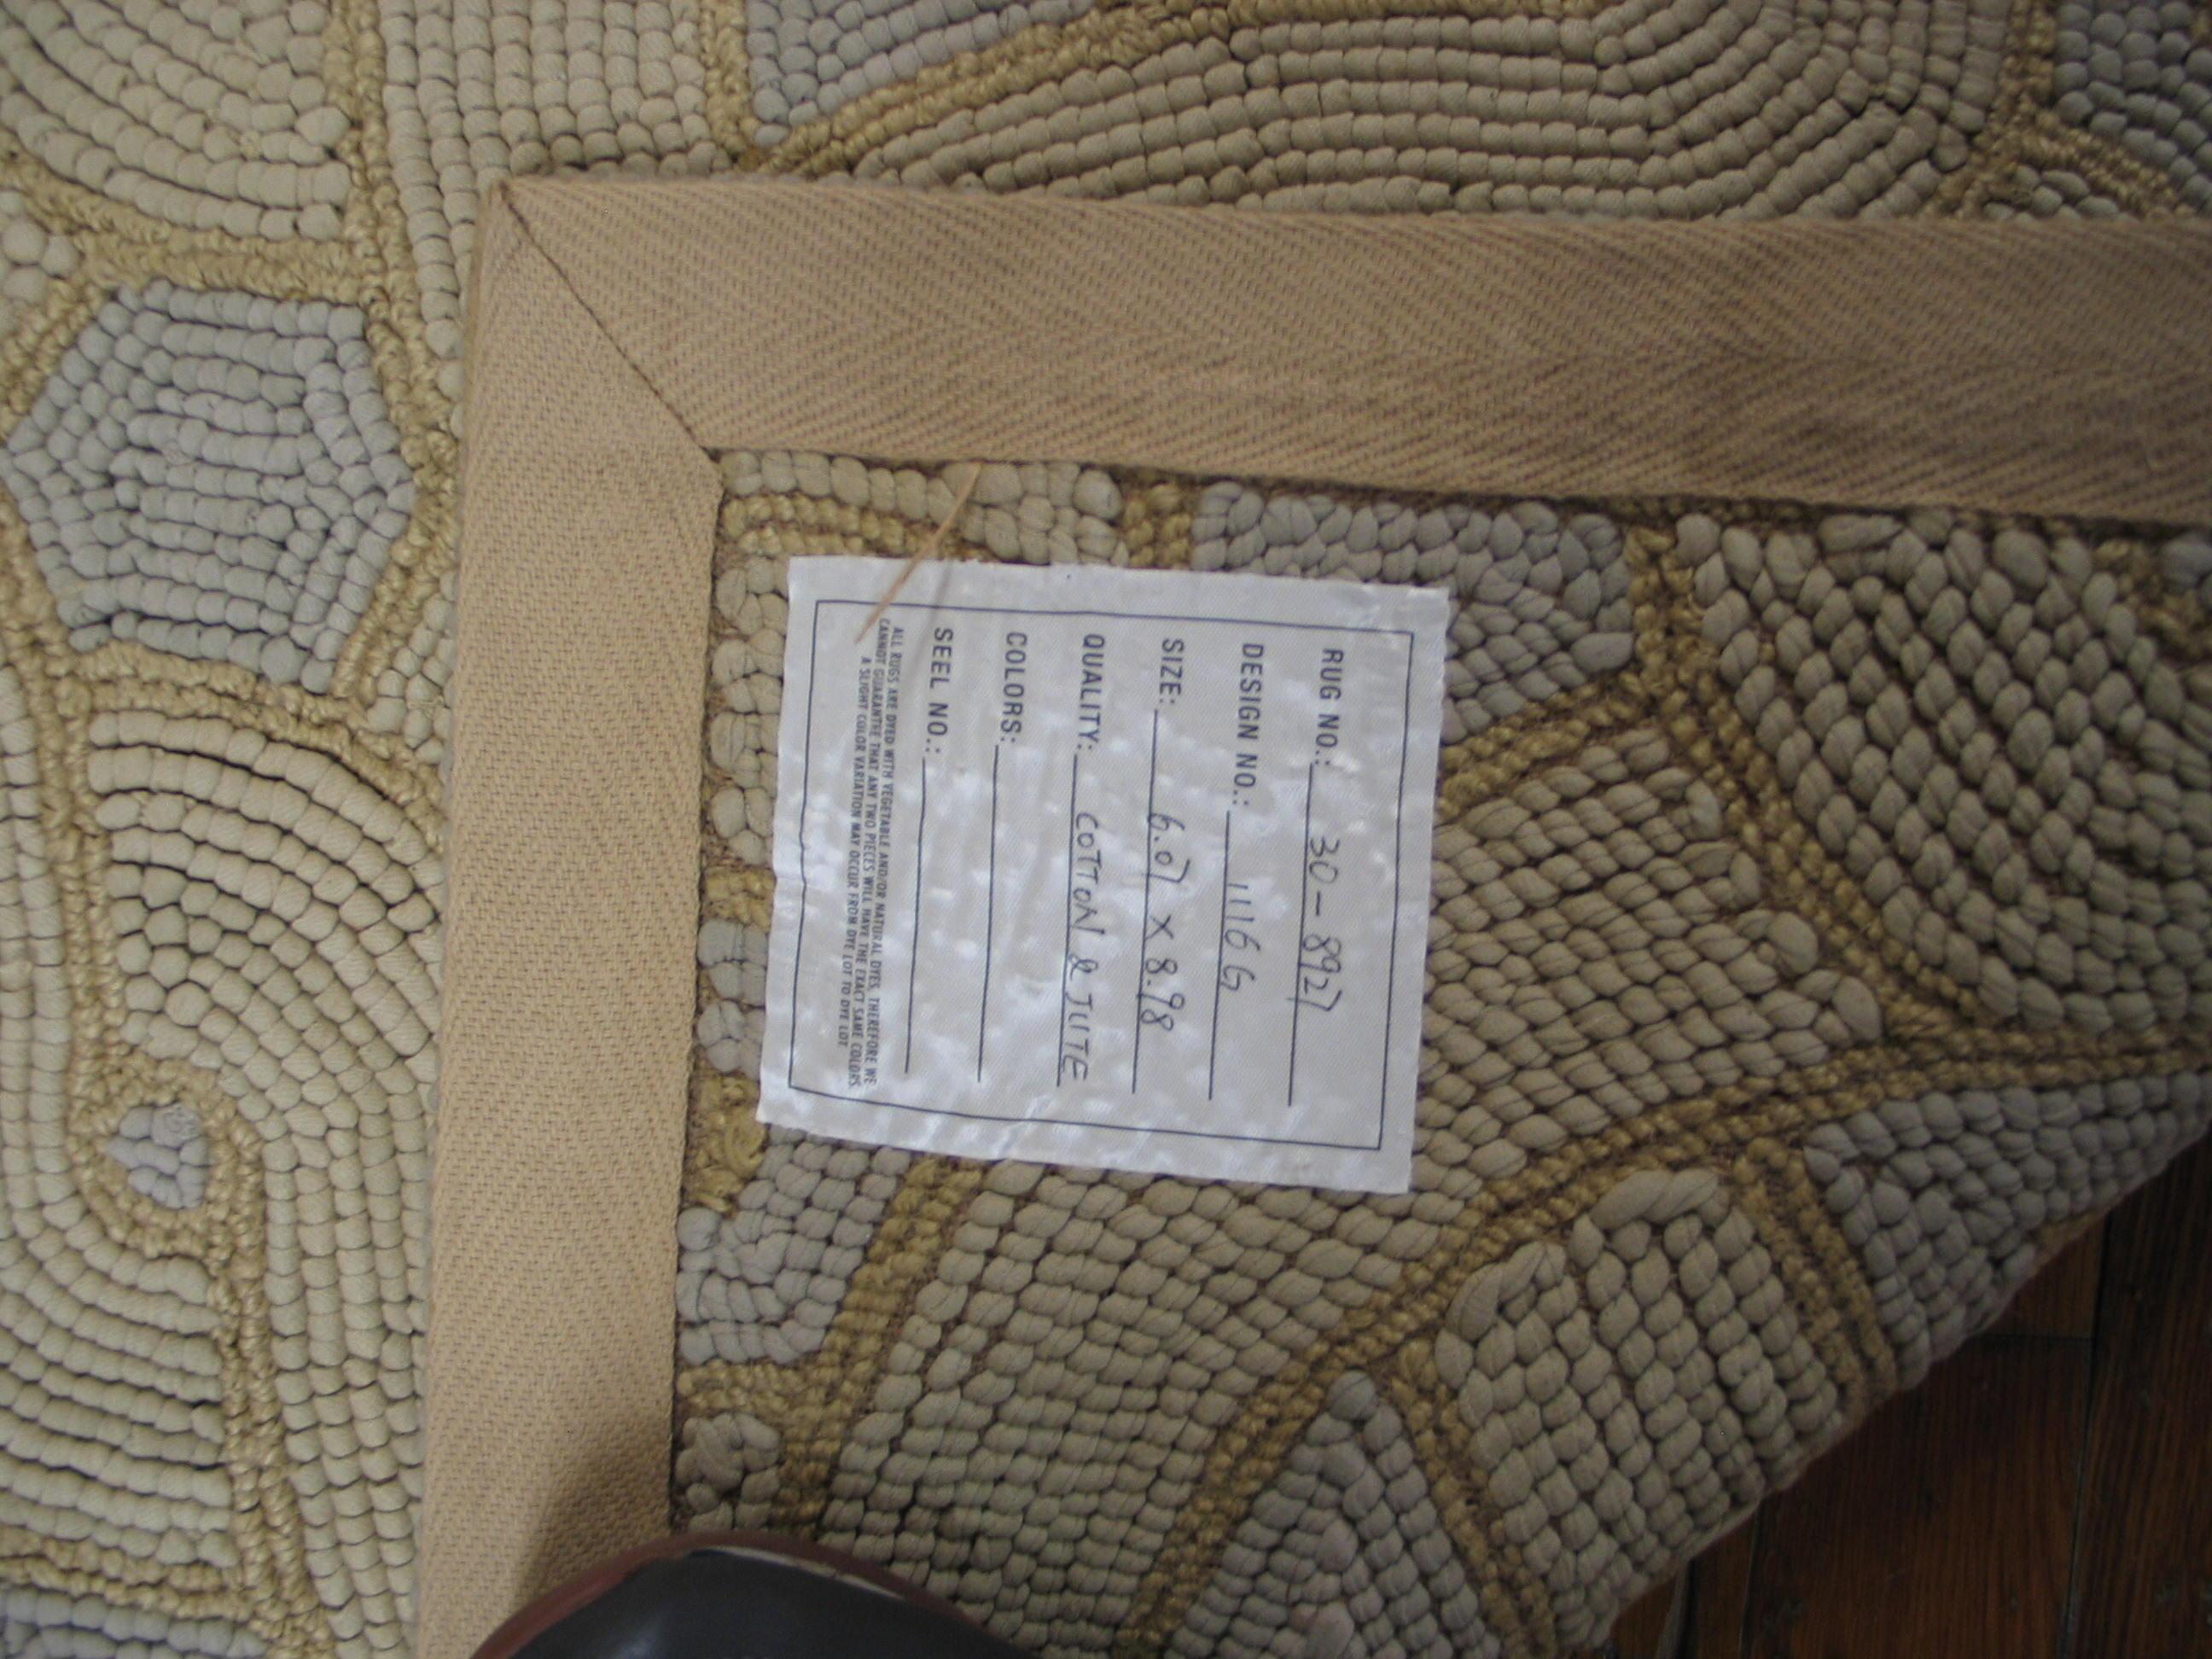 Contemporary  Cotton Hooked Rug 6' 0